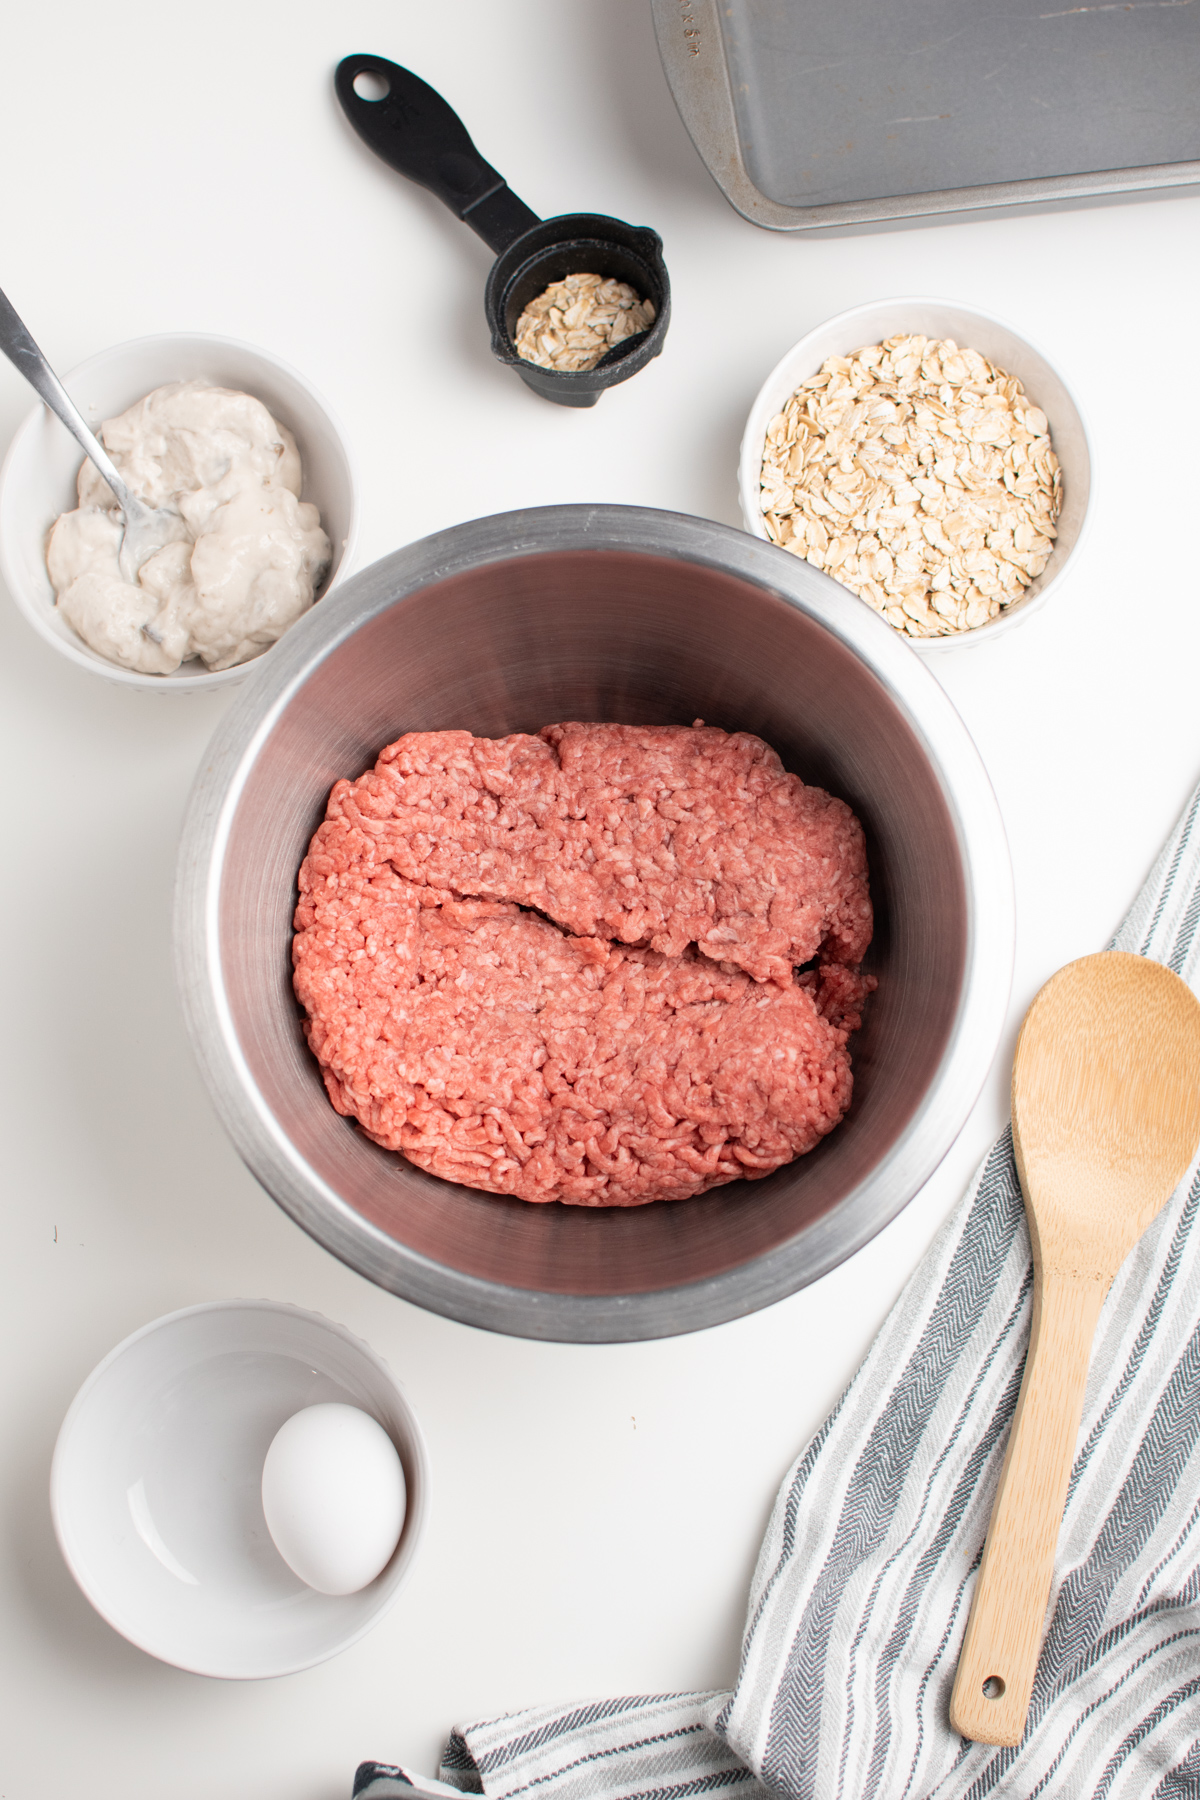 Meatloaf ingredients including ground beef, oats and an egg on white table.